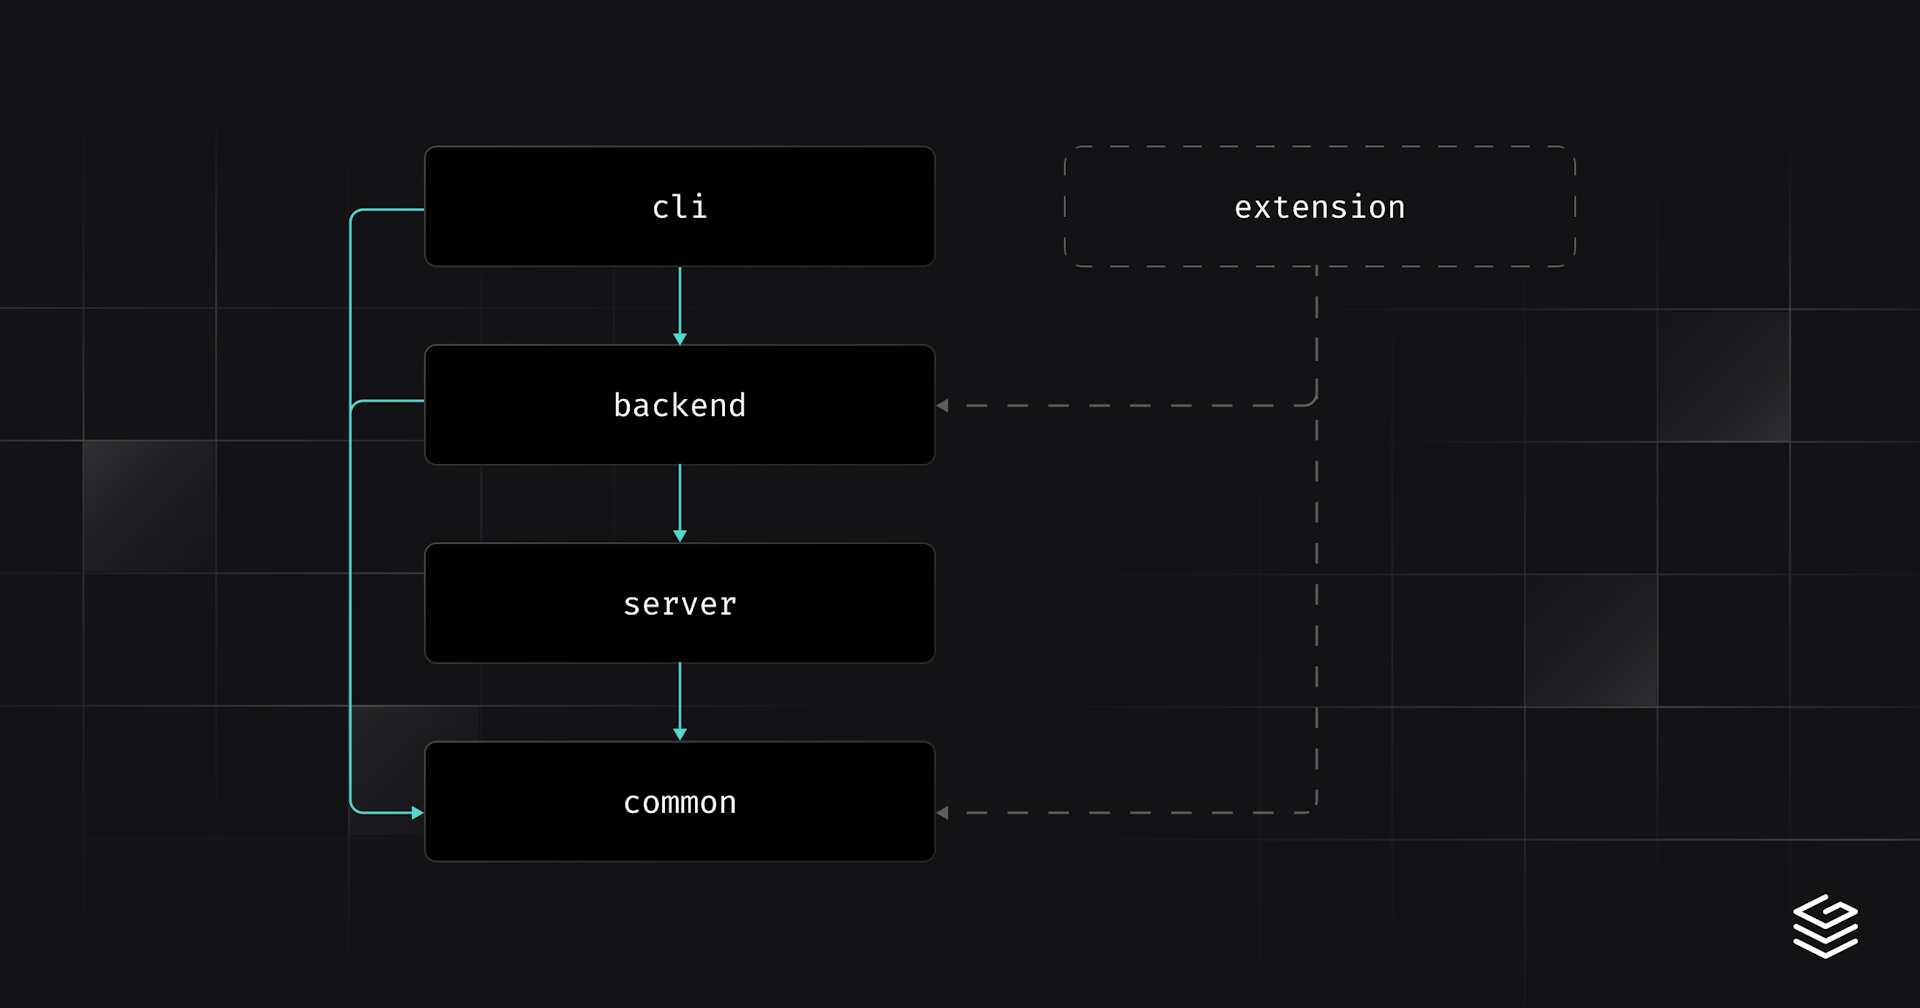 The Grafbase CLI crate structure visualization, shows the cli crate using the backend and common crates, the backend crate using the server and common crates, and the server crate using the common crate. Also shows a theoretical extension crate using the backend and common crates